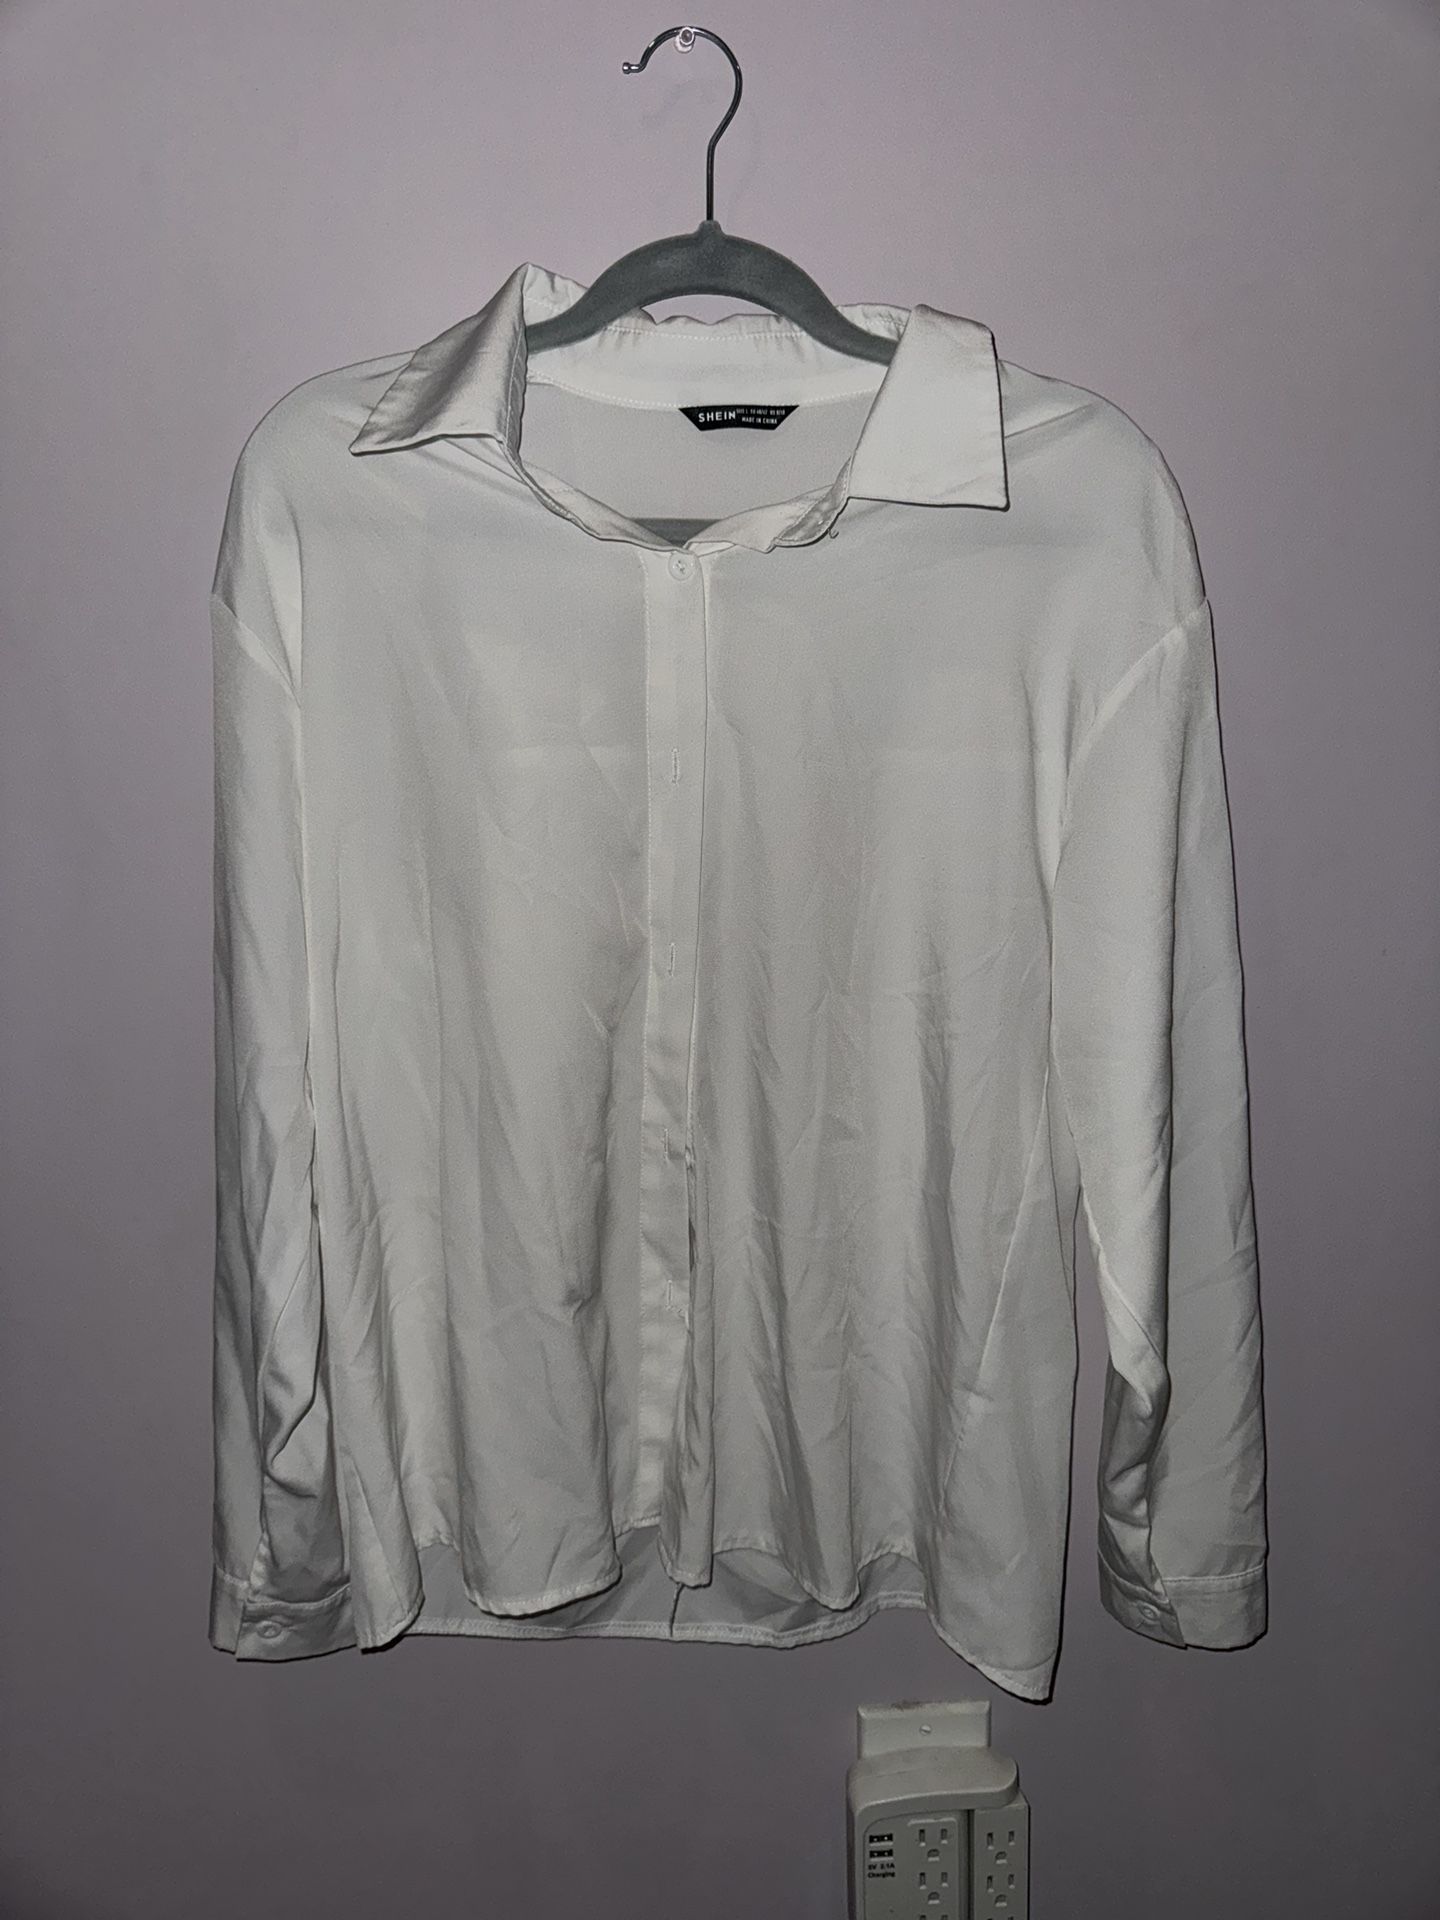 Women’s Large White Longsleeve Button Up